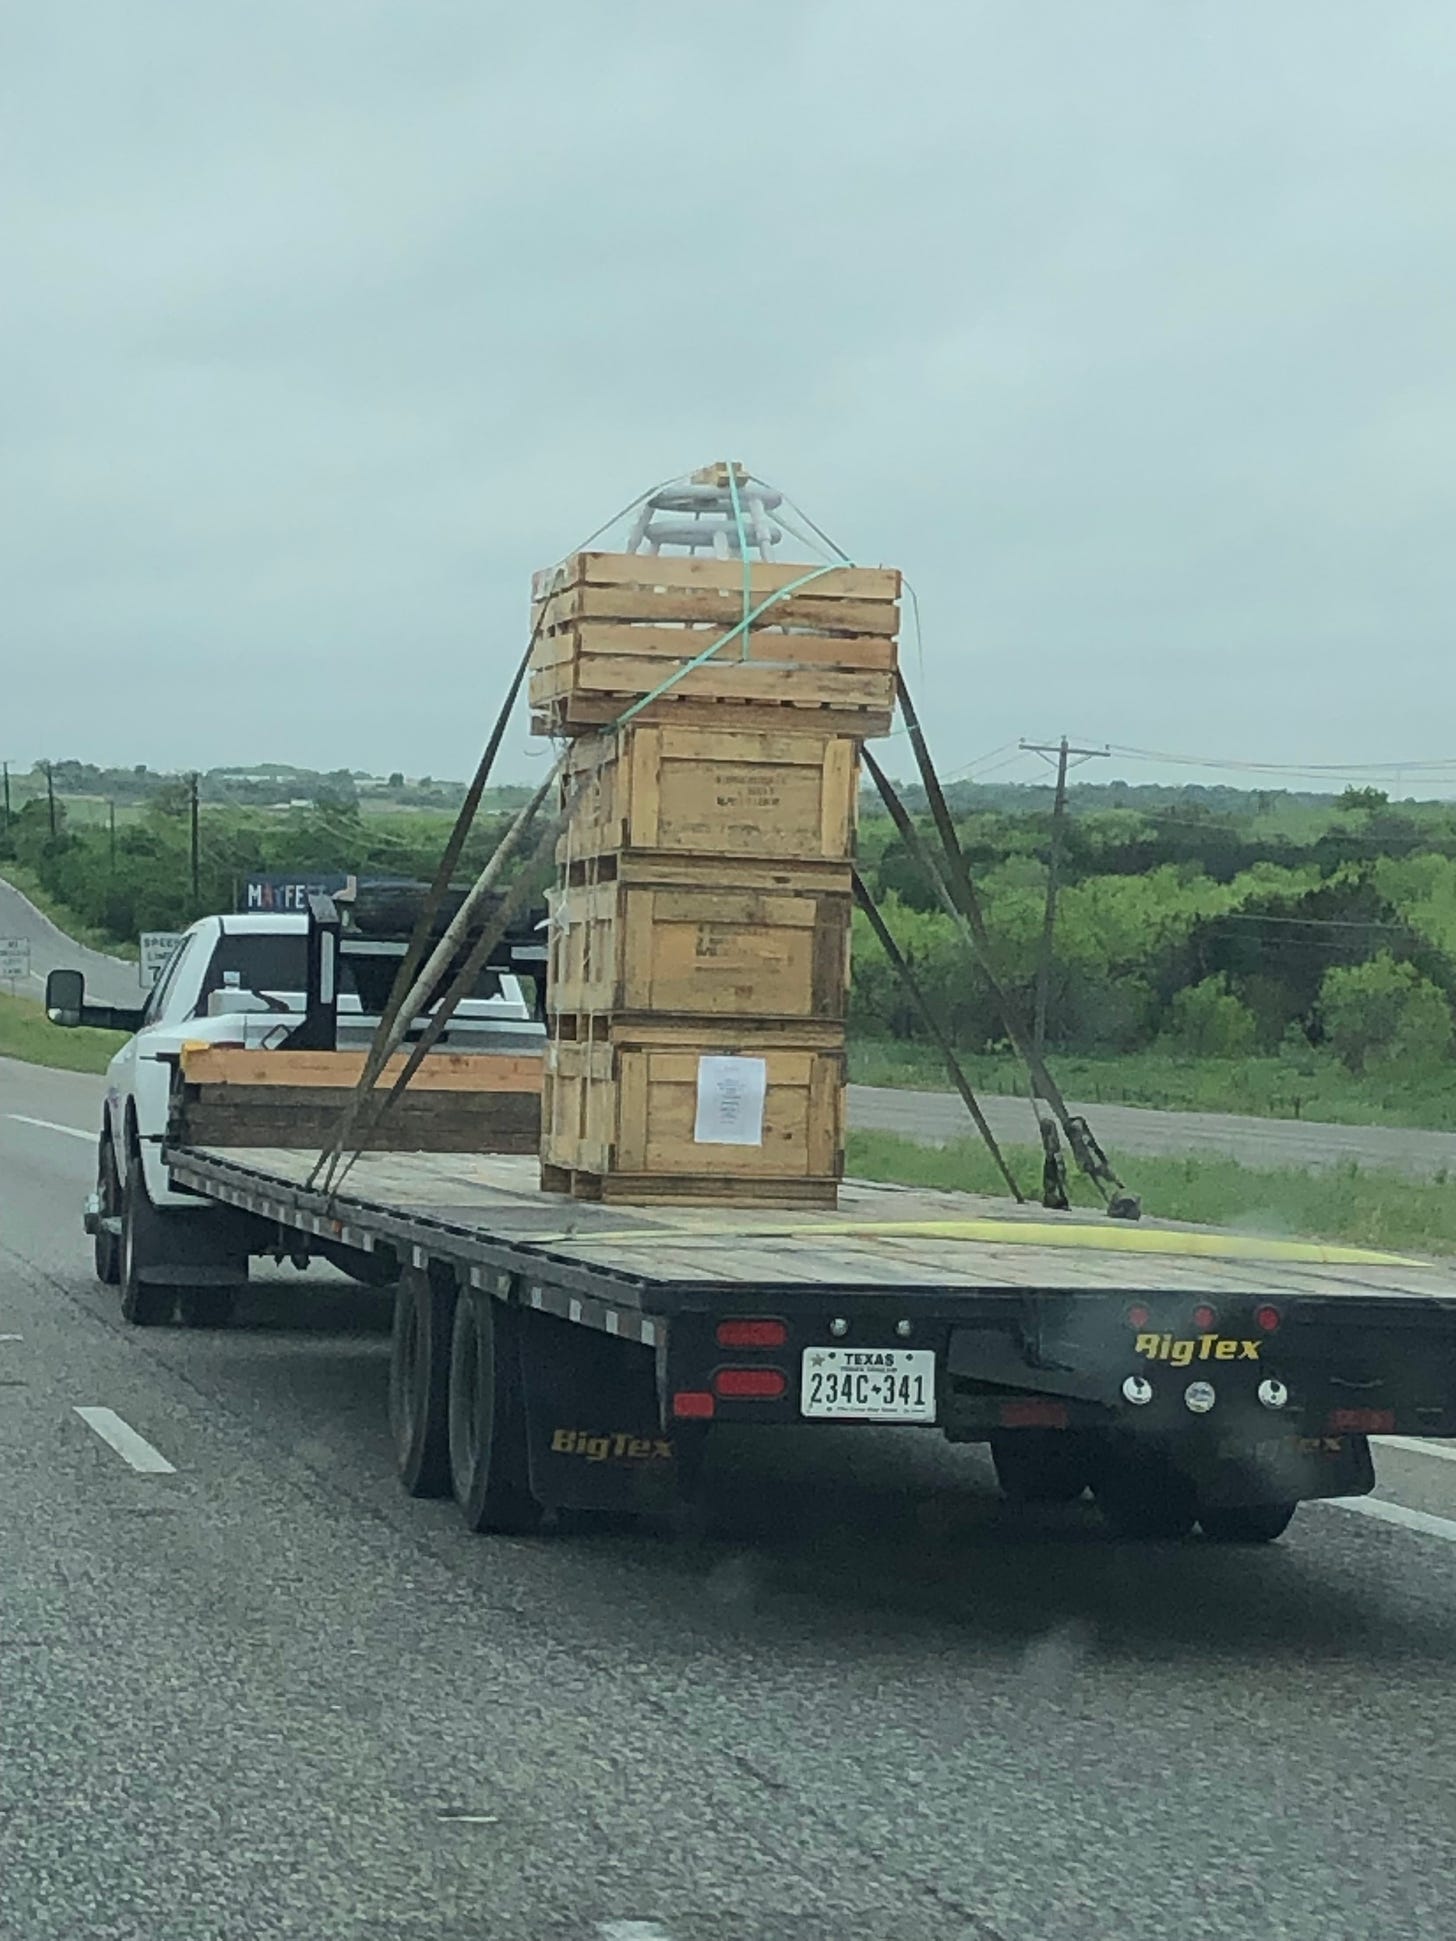 A flatbed truck with wooden crates stacked in a single pile, strapped down on a flatbed truck, looking very precarious